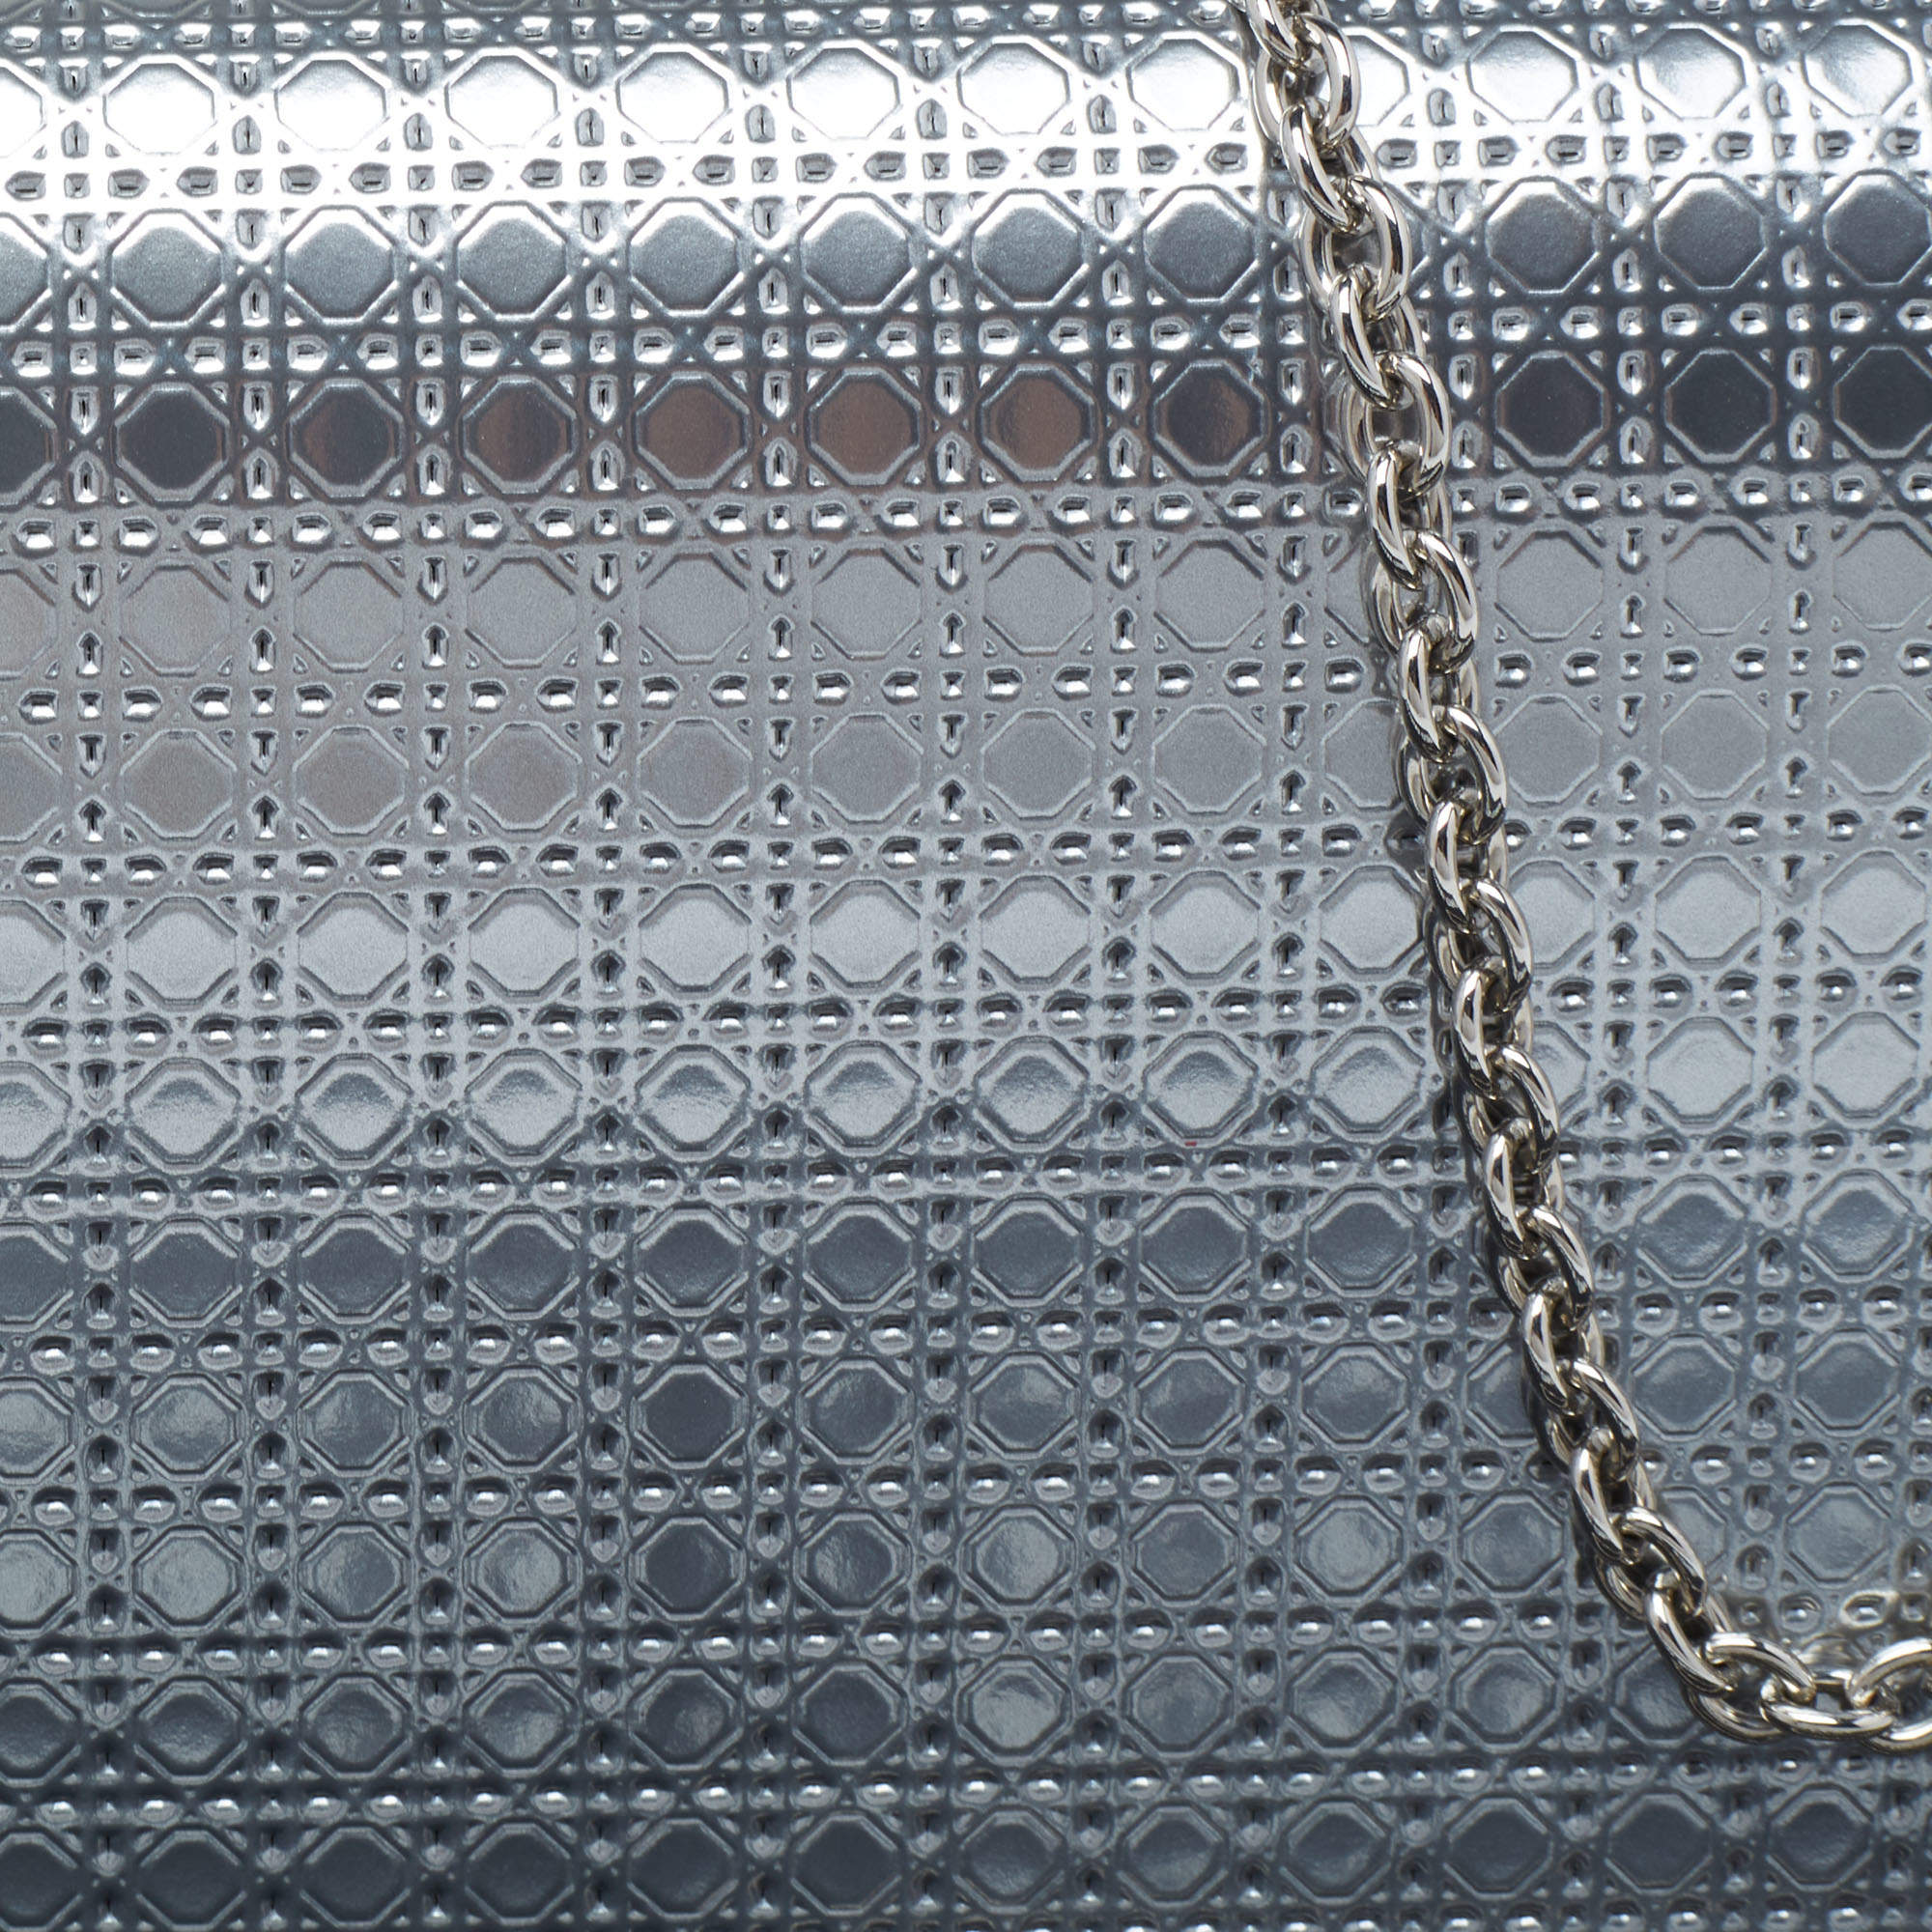 Christian Dior Lady Dior Croisiere Perforated Clutch in Silver — UFO No More